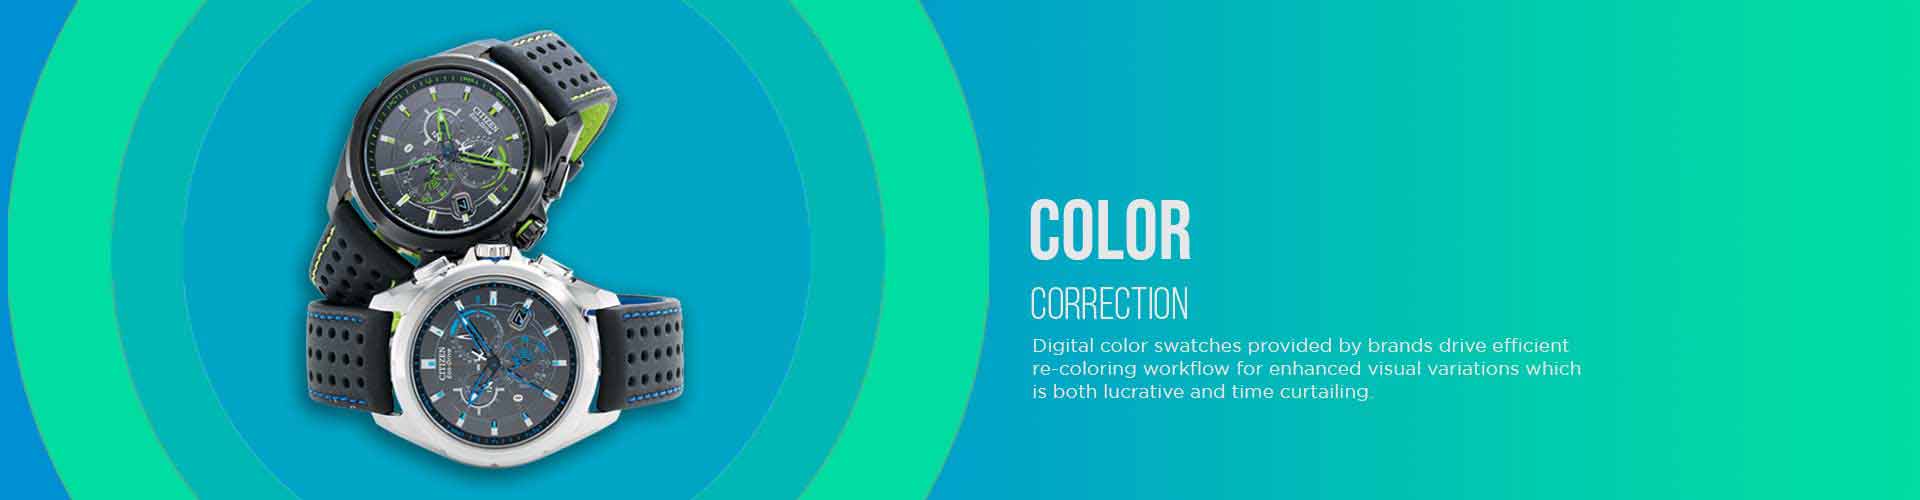 color correction banner